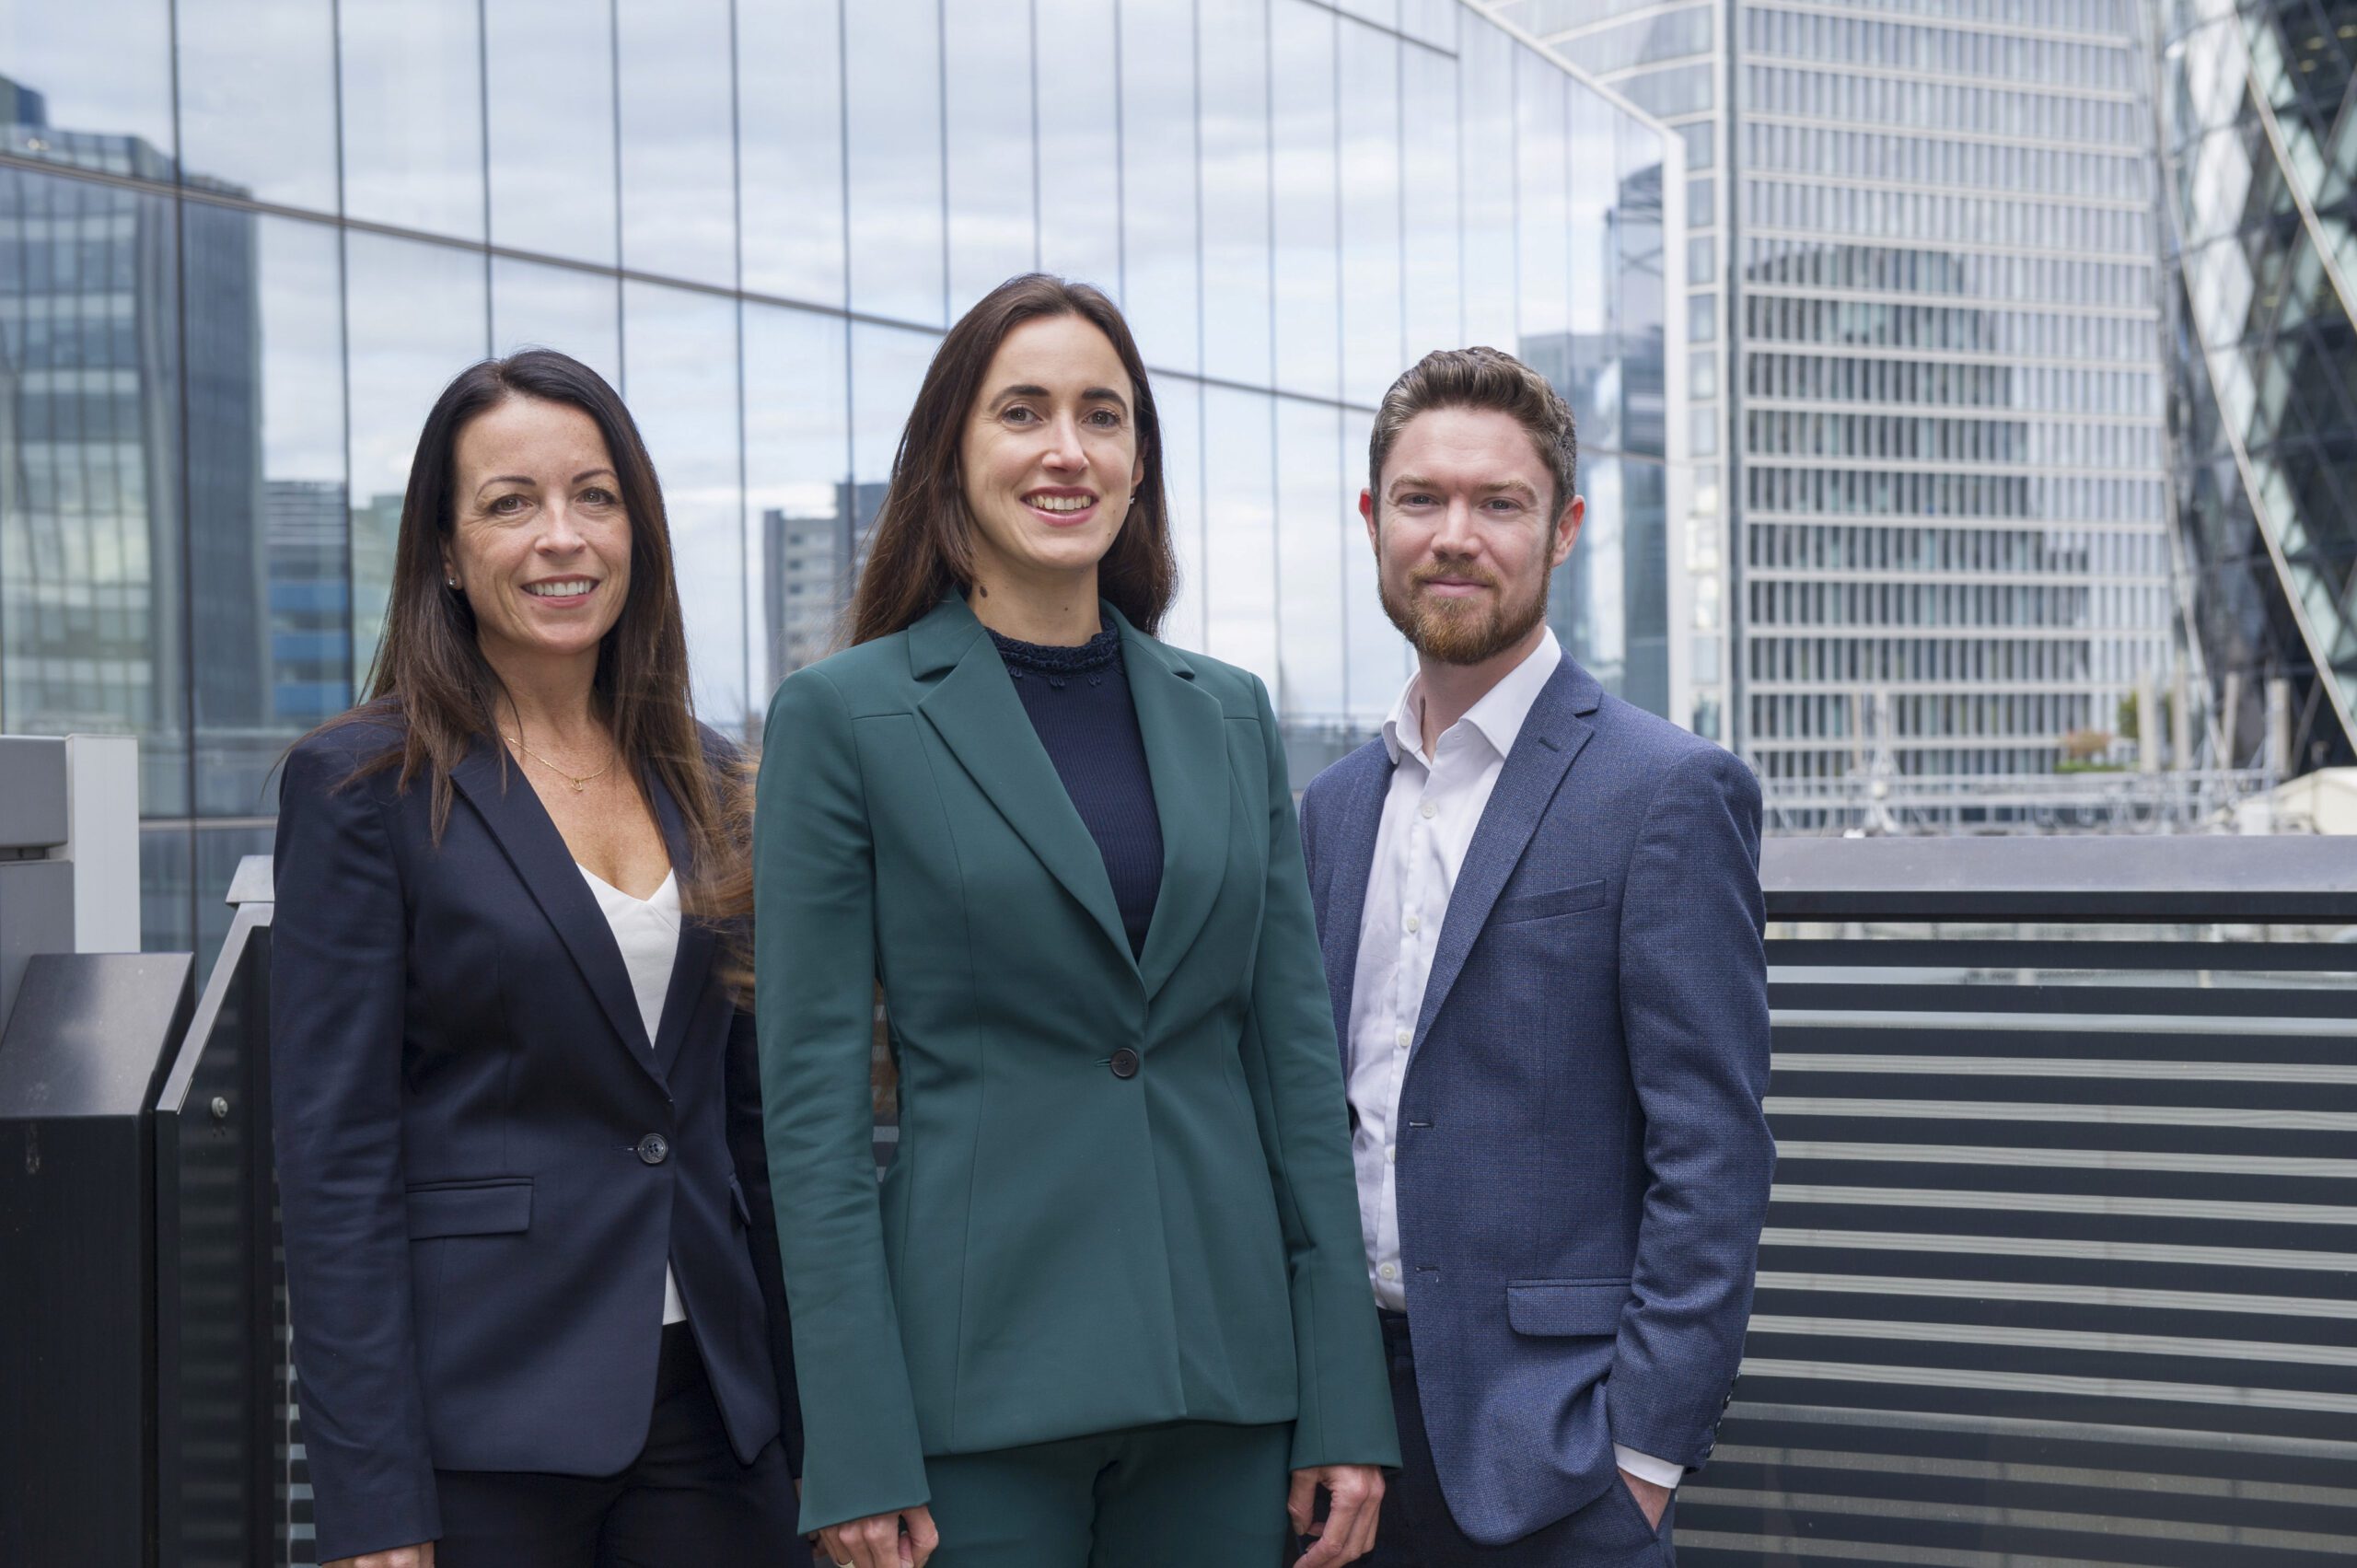 Kennedys grows team behind revolutionary tech with trio of hires